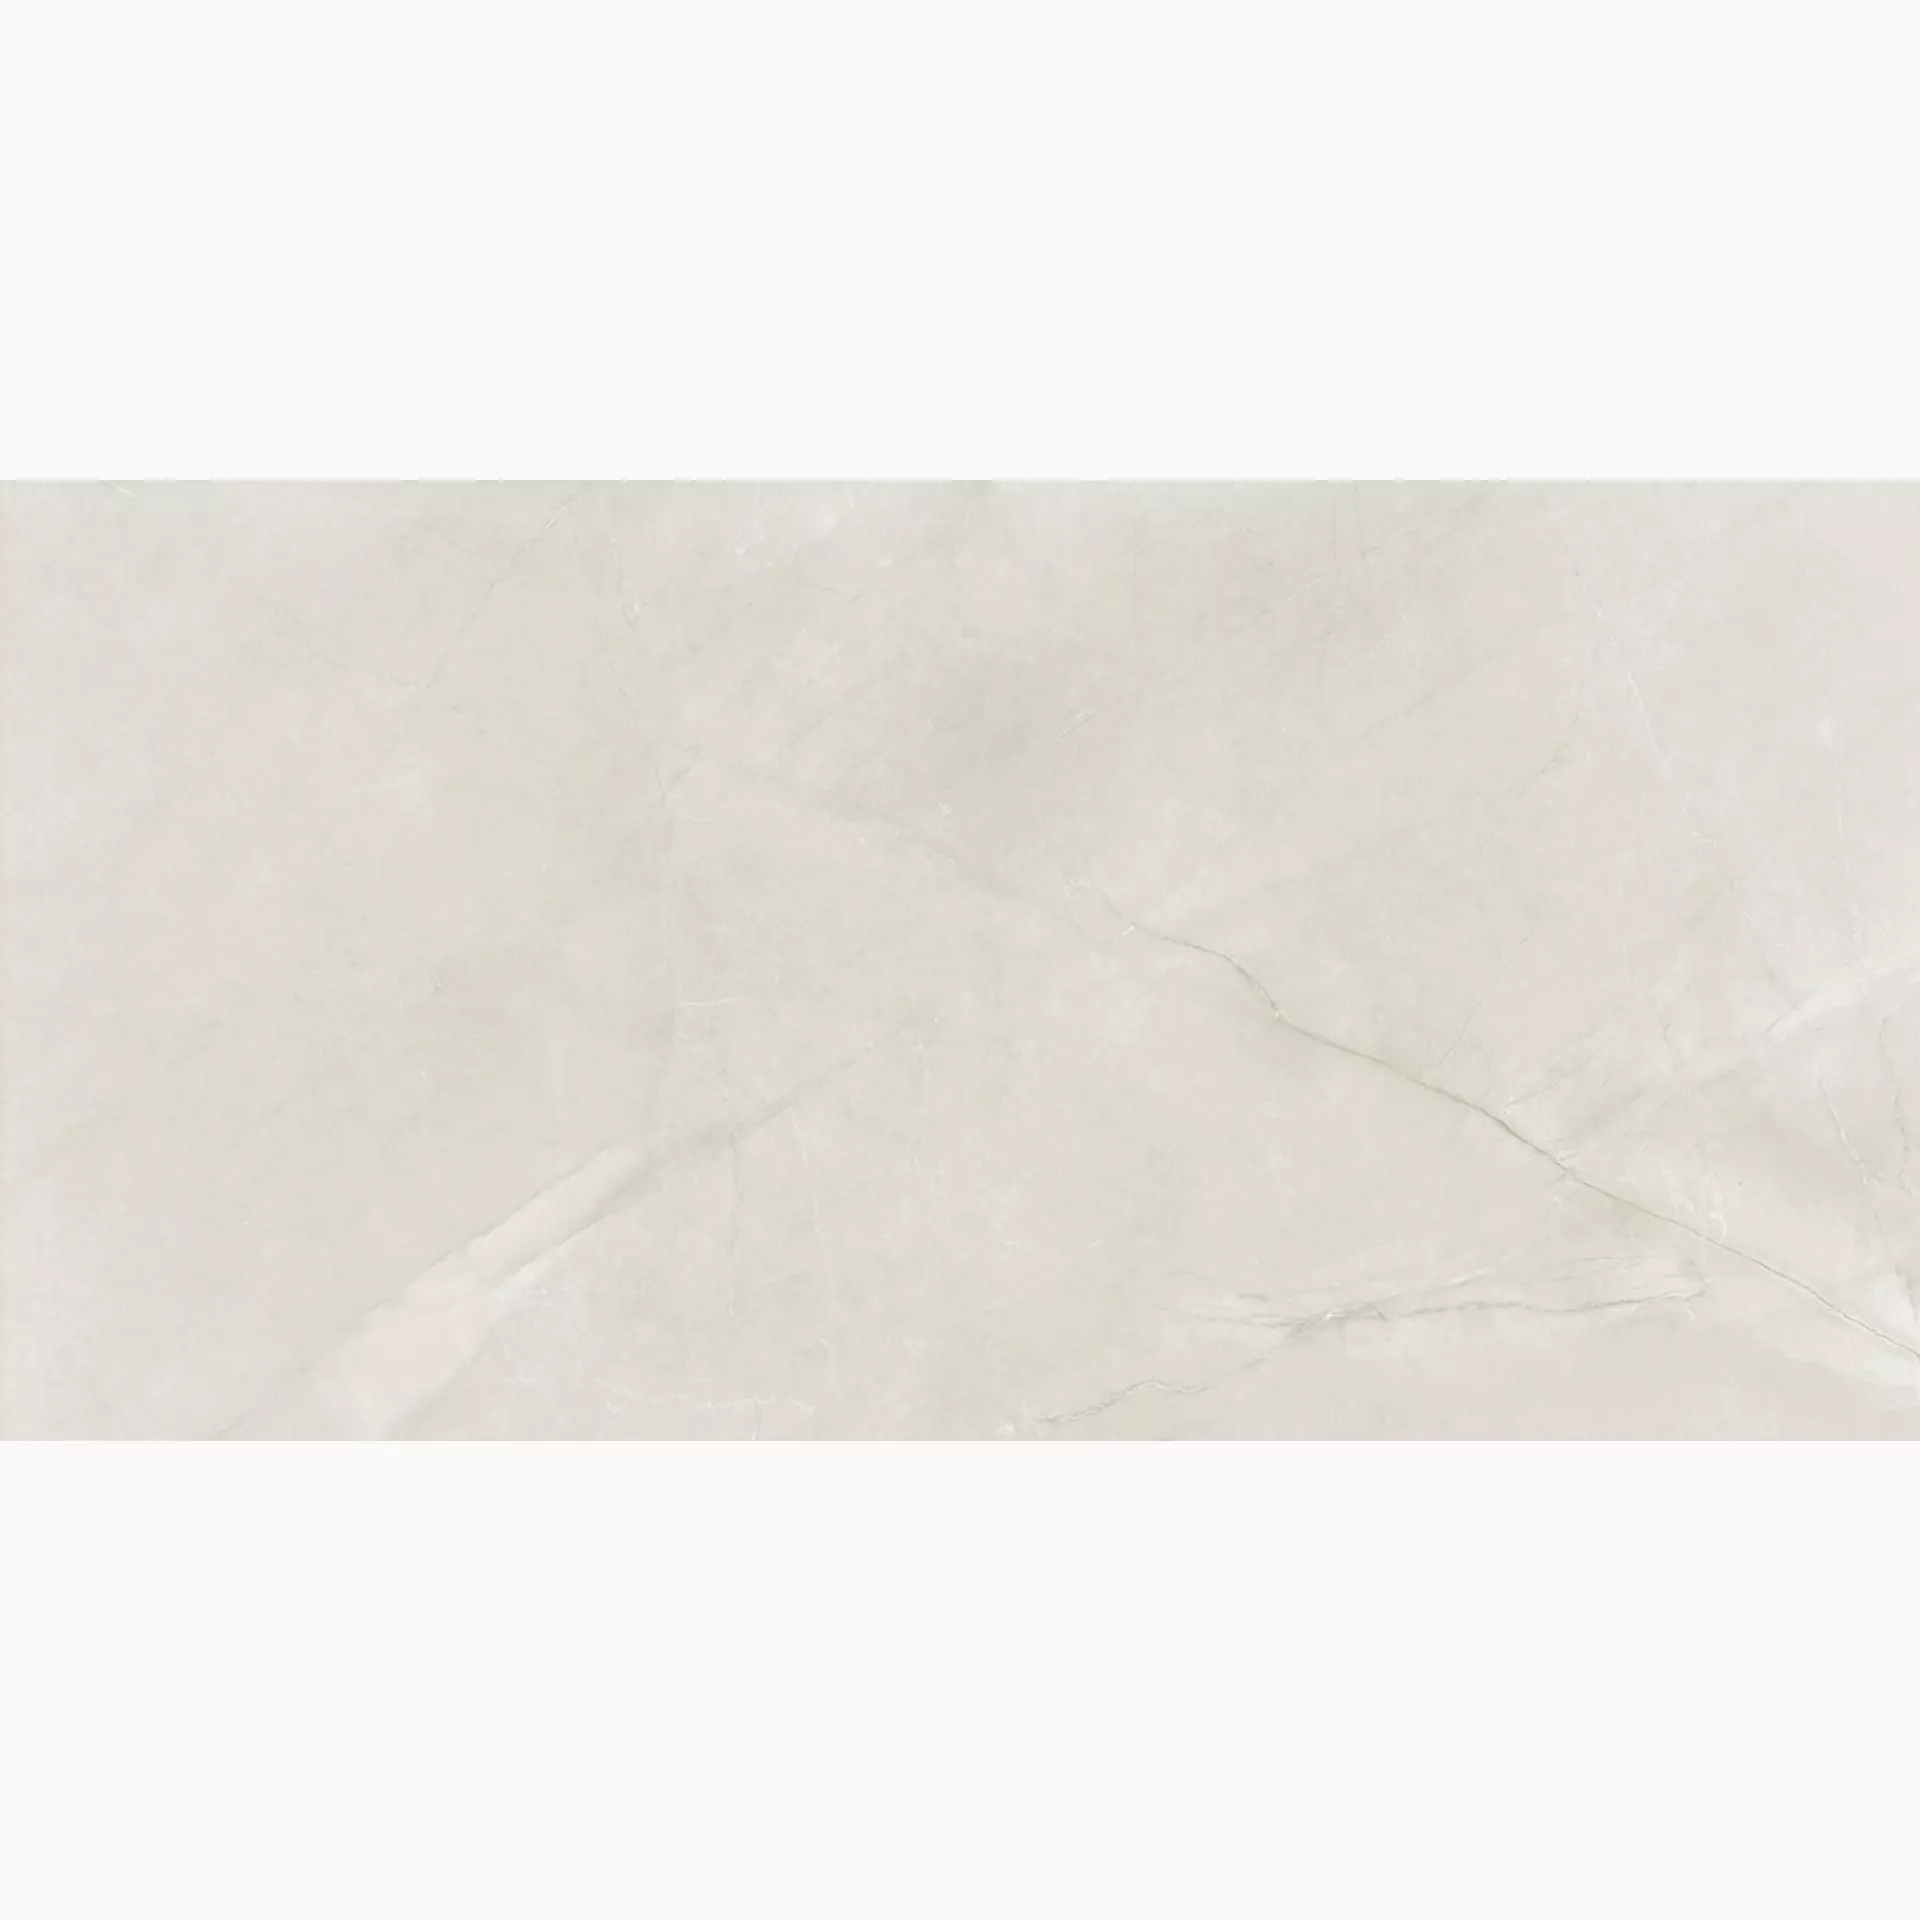 MGM Lux White Levigato LUXWHILEV3060 30x60cm rectified 10mm